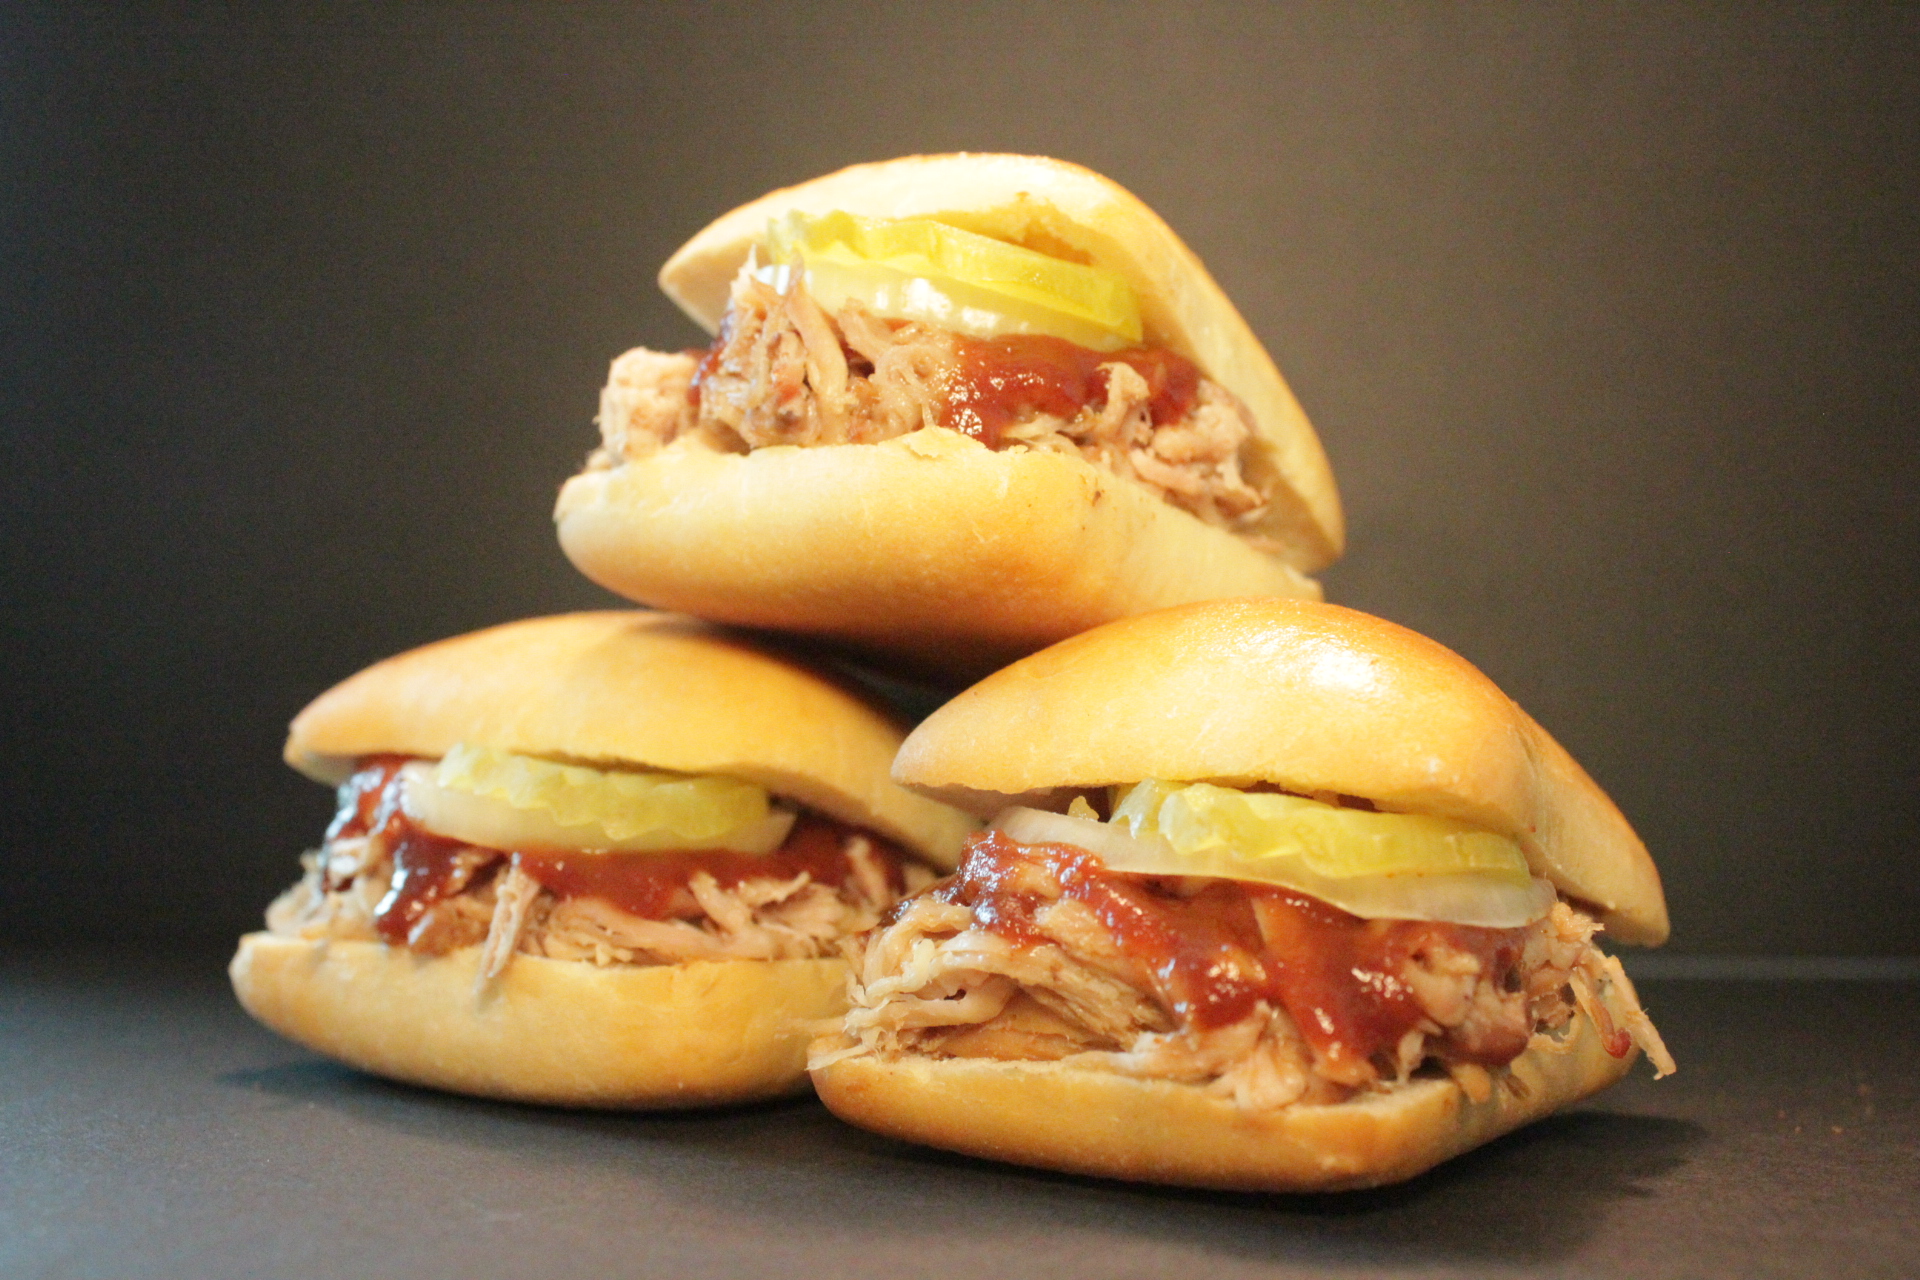 Pittsburgh - PNC Park: Manny's BBQ - Pulled Pork and Piero…